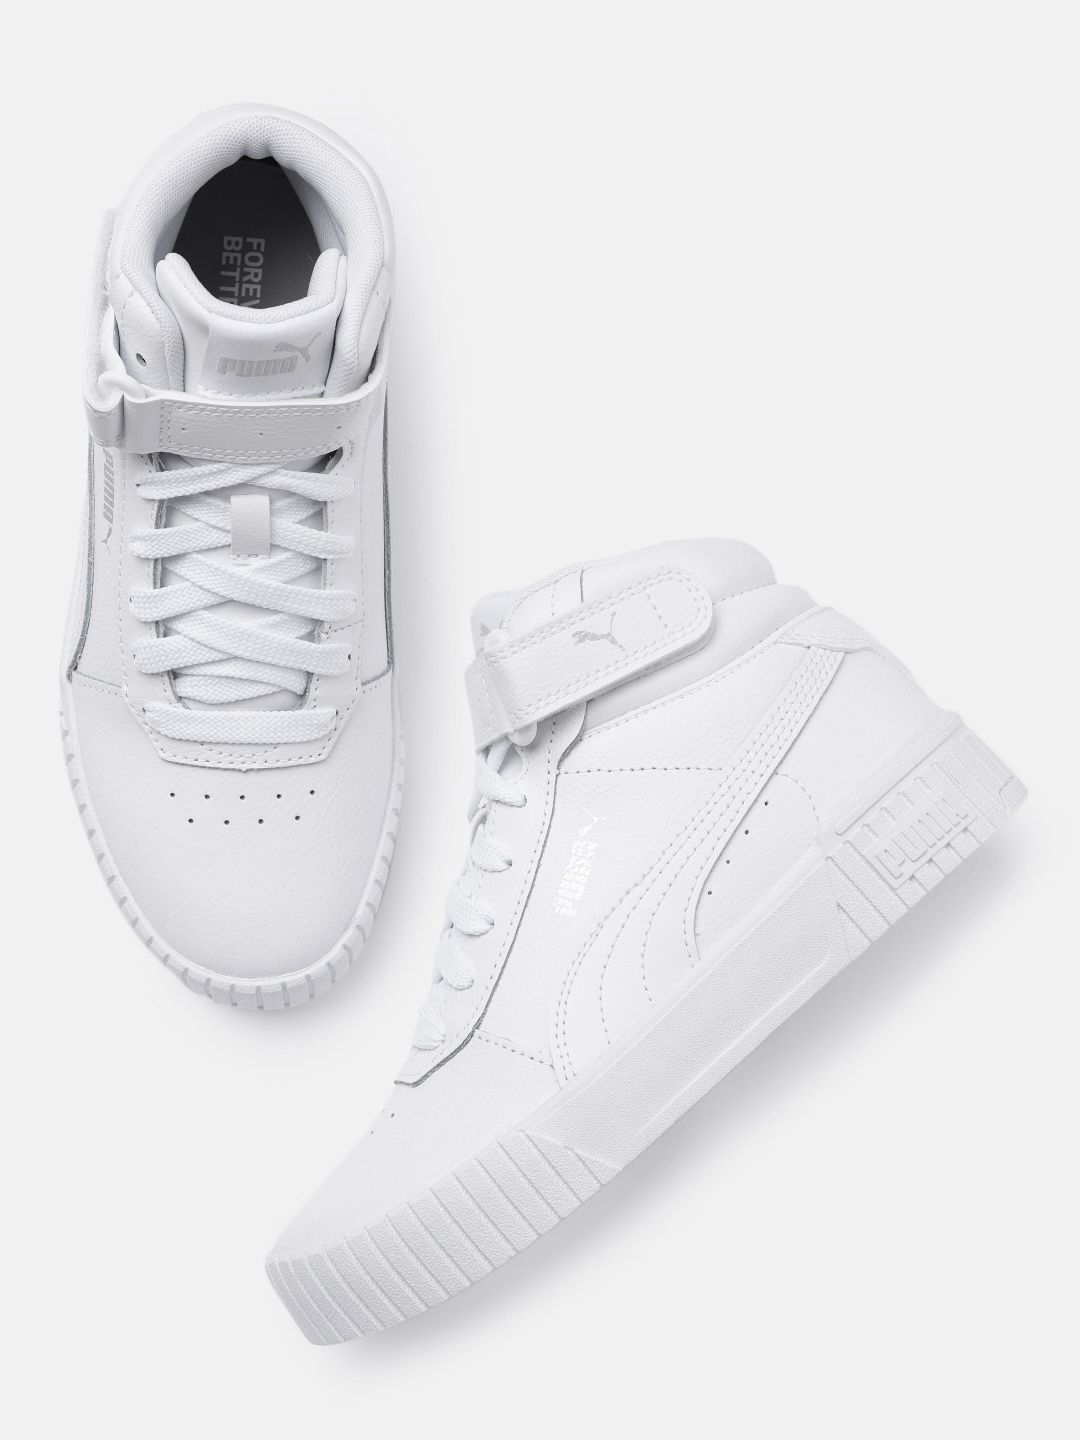 Puma Women White Solid Carina 2.0 Leather Mid-Top Sneakers with Perforation Detail Price in India